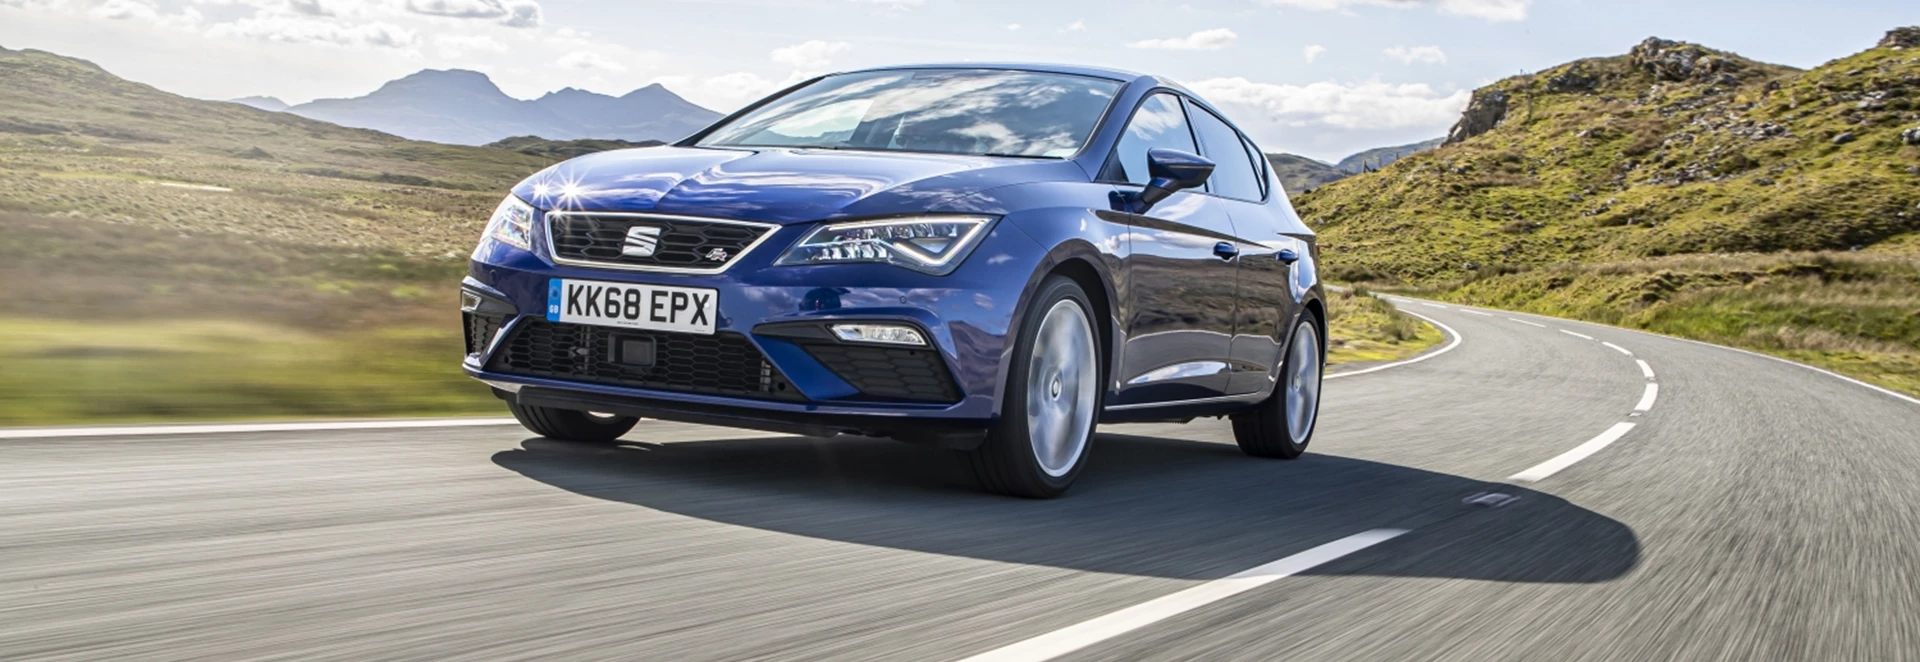 Seat Leon 2019 Review